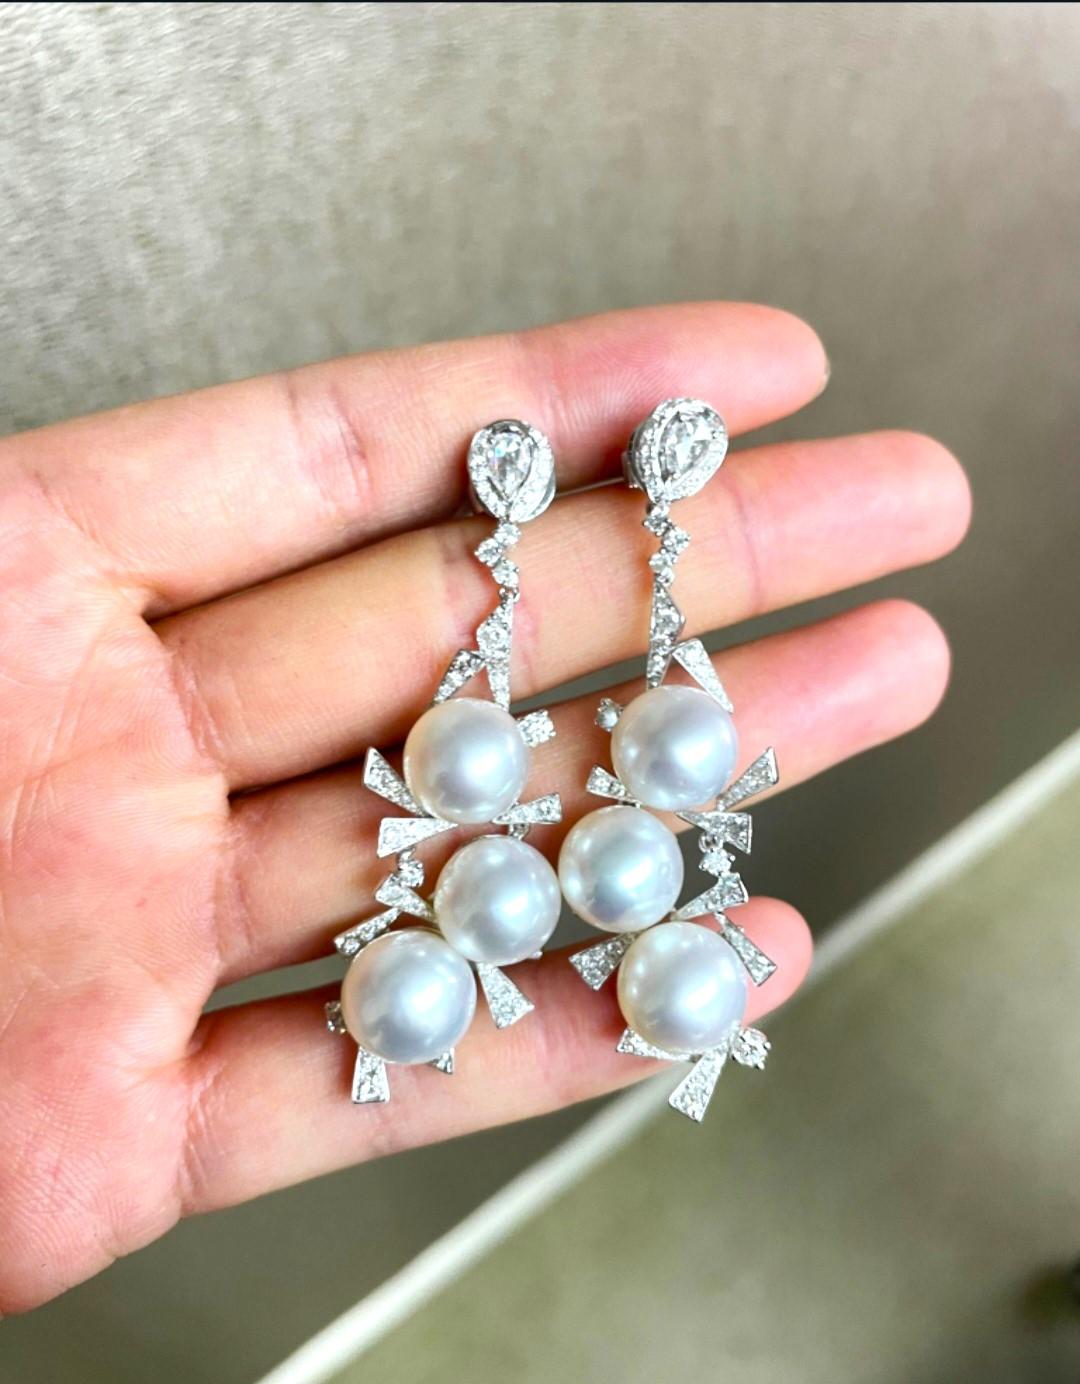 The Following Item we are offering is this Extremely Rare Beautiful 18KT Gold Fine Rare Large South Sea Pearl Fancy Diamond Dangle Drop Earrings. These Magnificent Earrings are comprised of 6 Rare Fine Large AA-AAA South Sea Pearls with Gorgeous